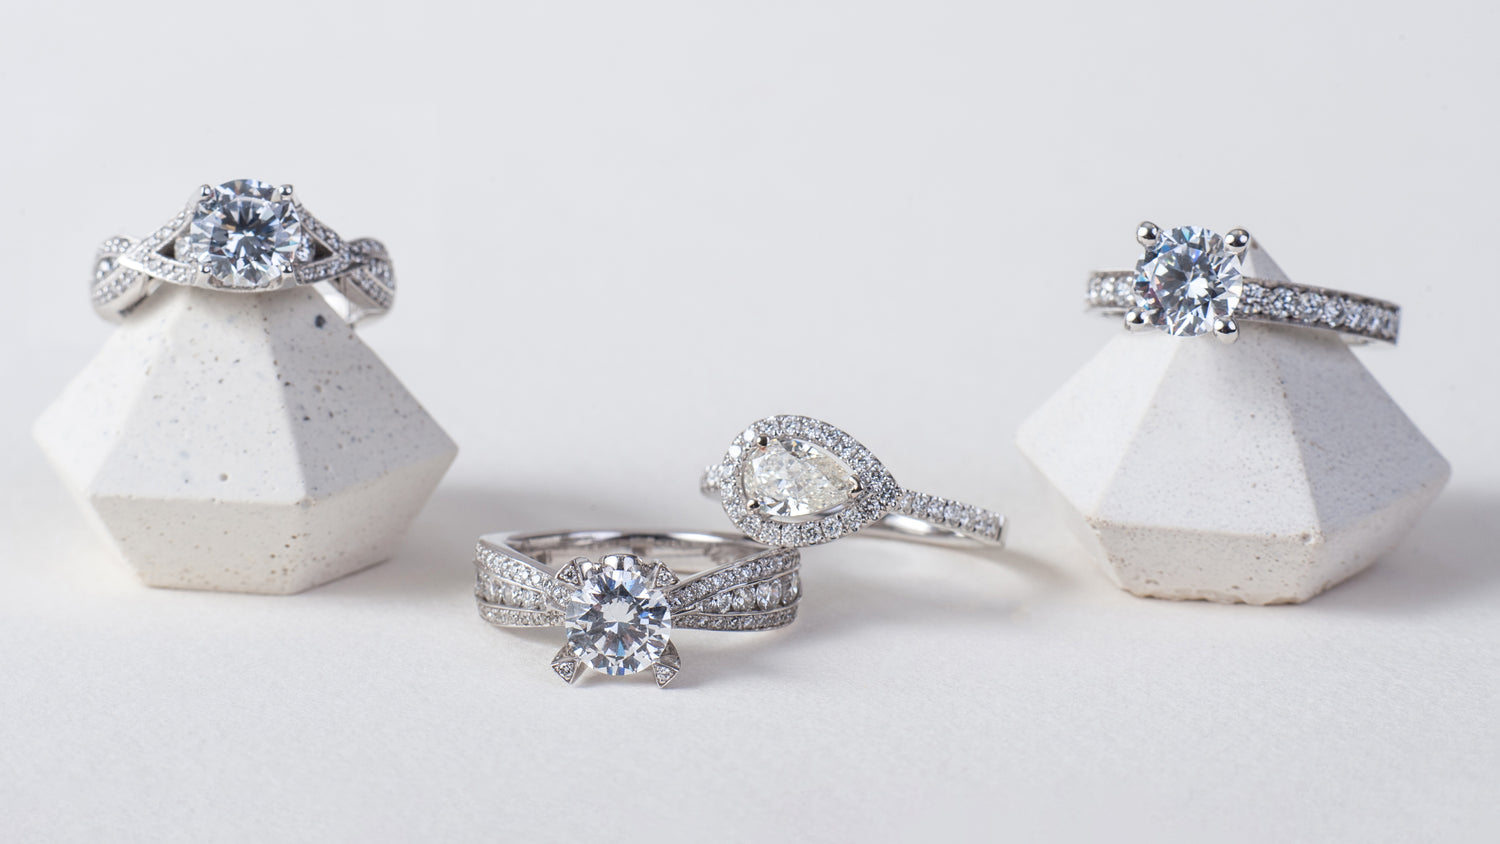 4 diamond engagement rings on a white background.